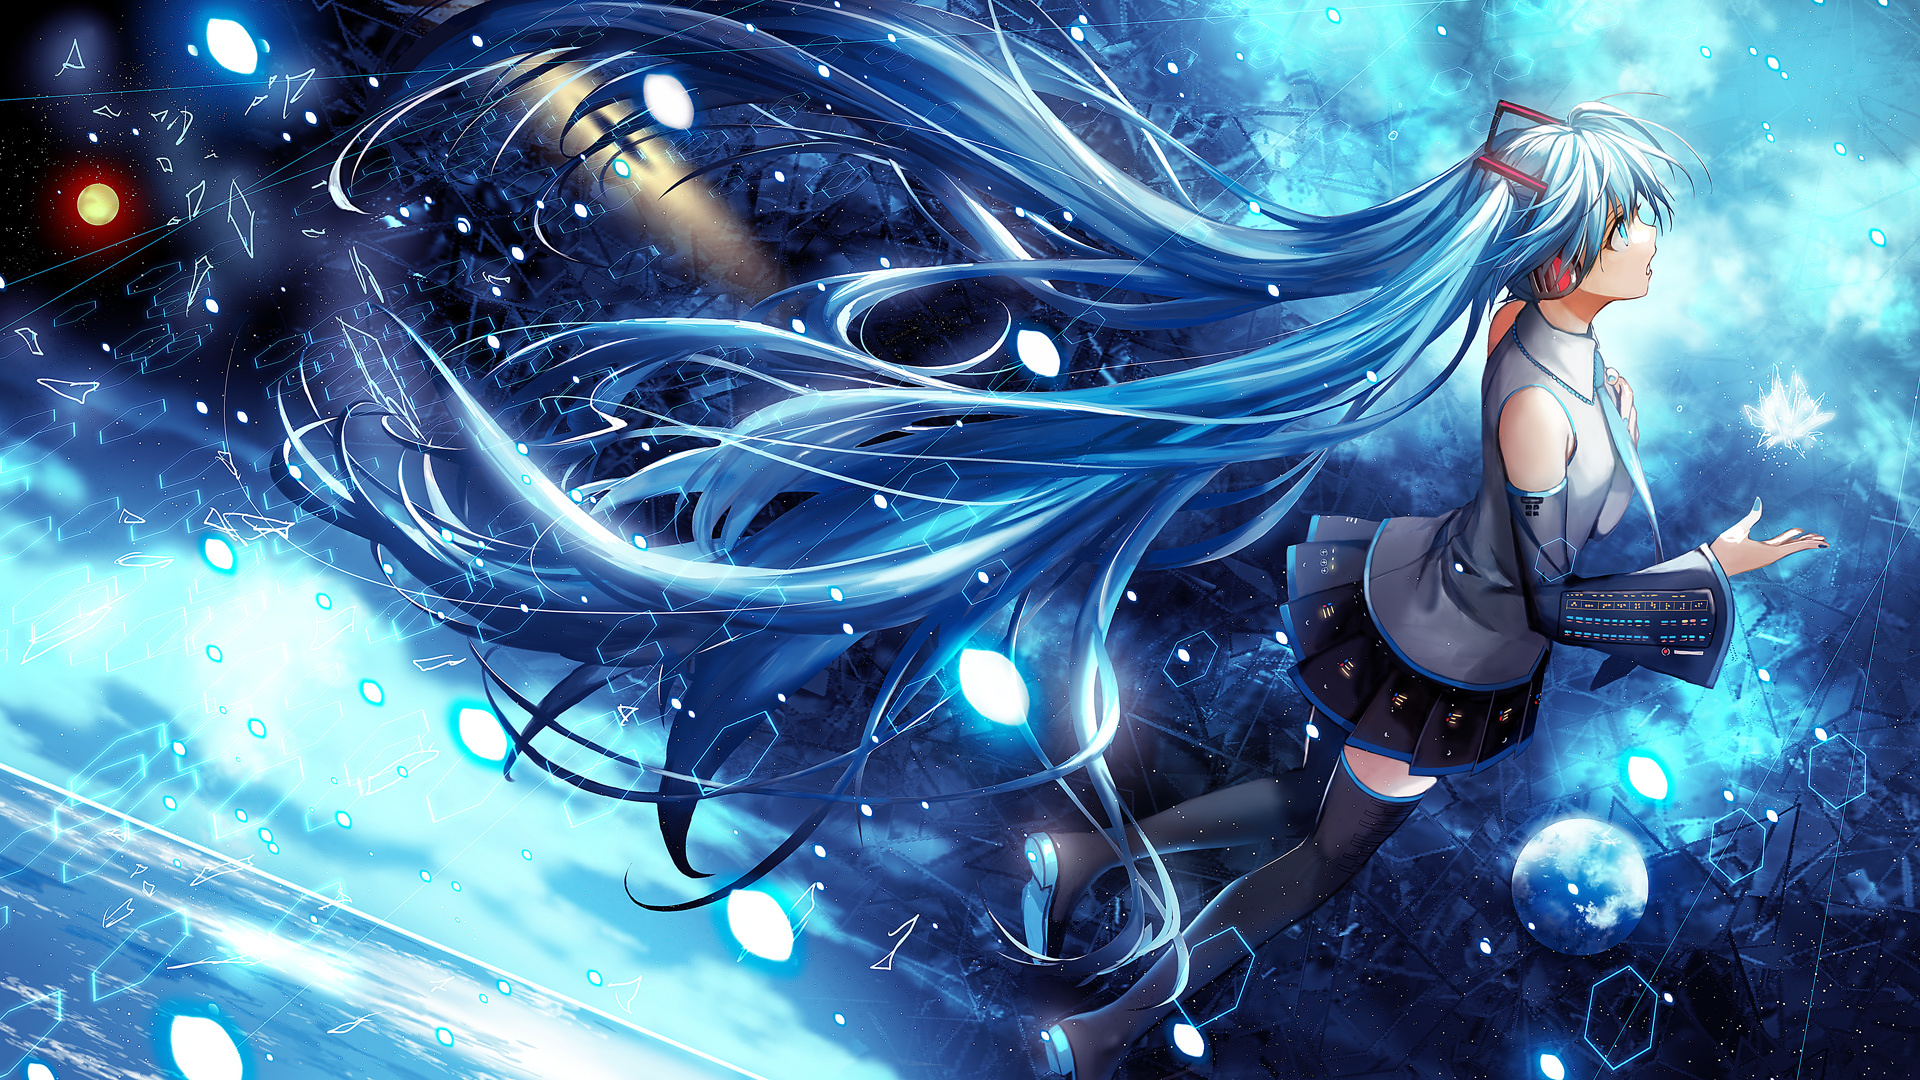 2560x1080 Vocaloid Hatsune Miku Stars 2560x1080 Resolution Wallpaper Hd Anime 4k Wallpapers Images Photos And Background Wallpapers Den